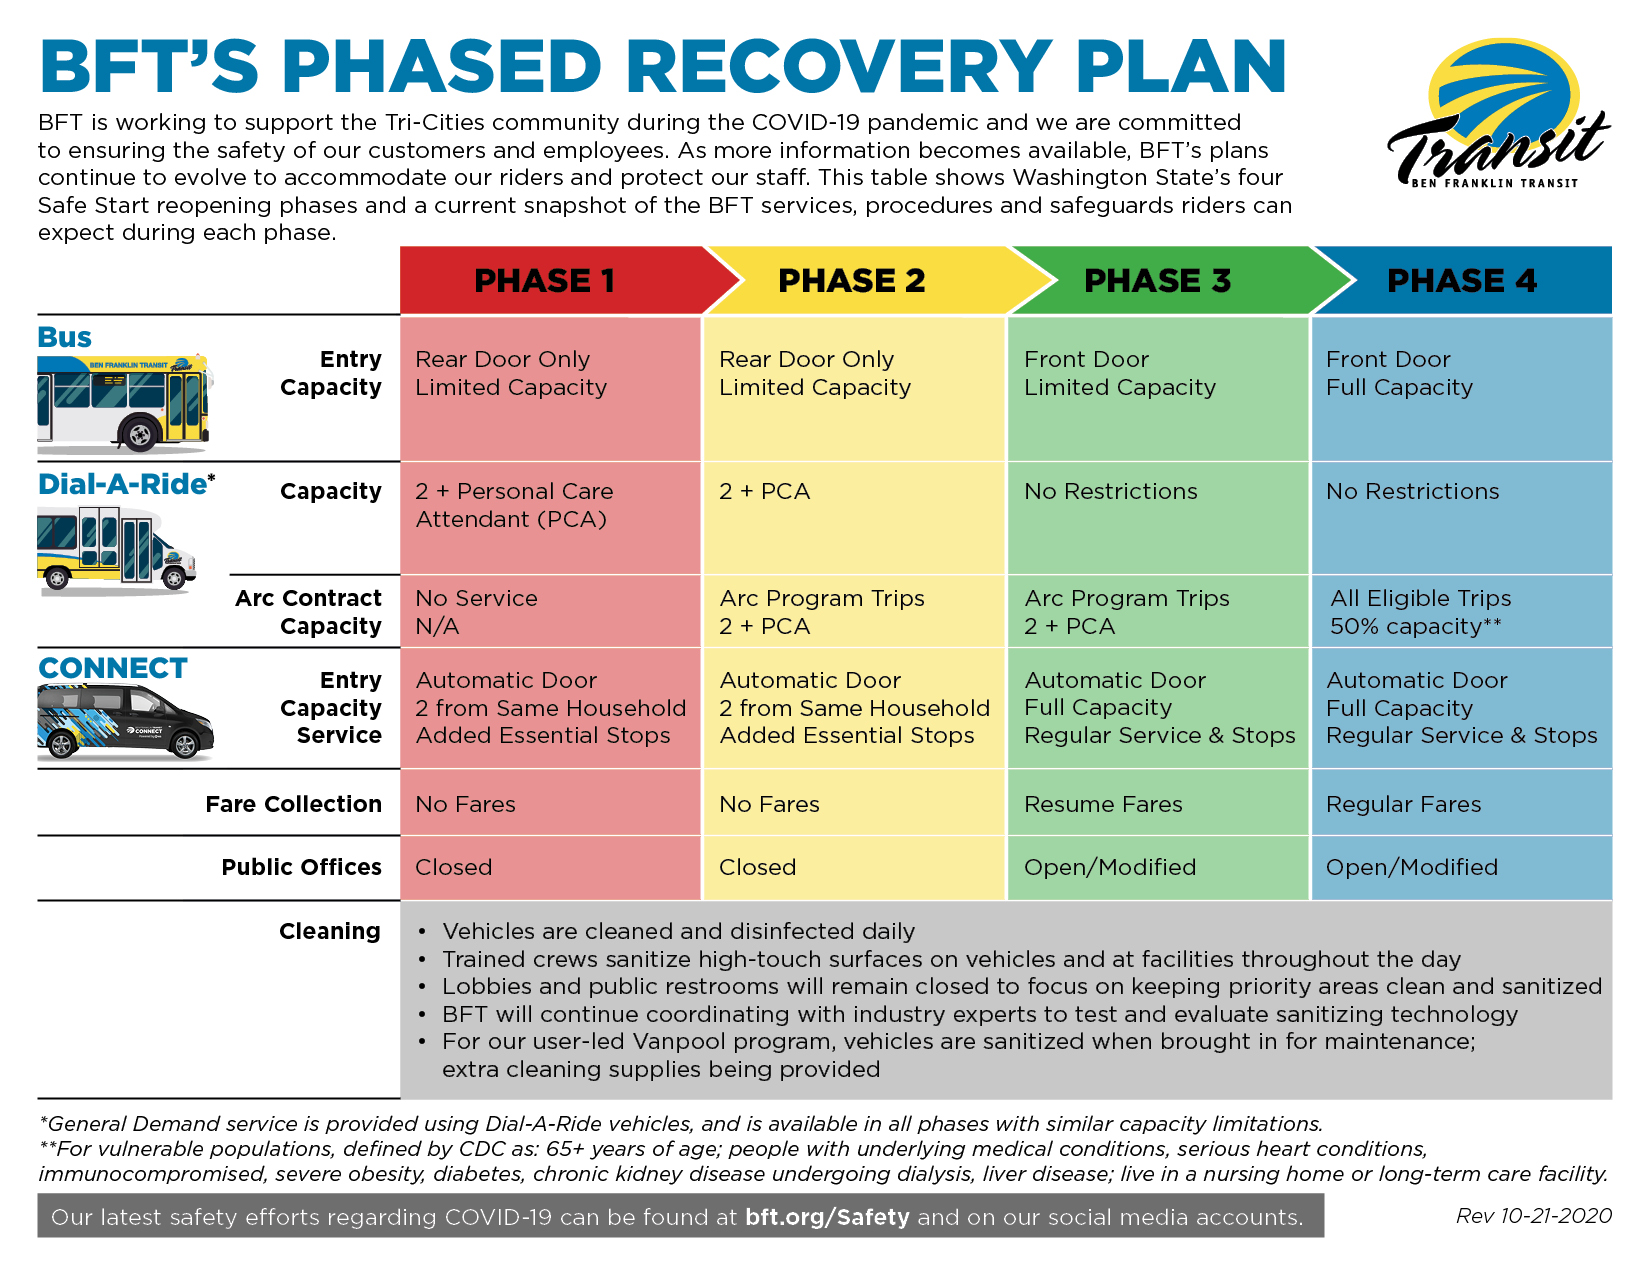 BFT-Phased-Recovery-Plan-Overview_Rev10-21-2020_FINAL